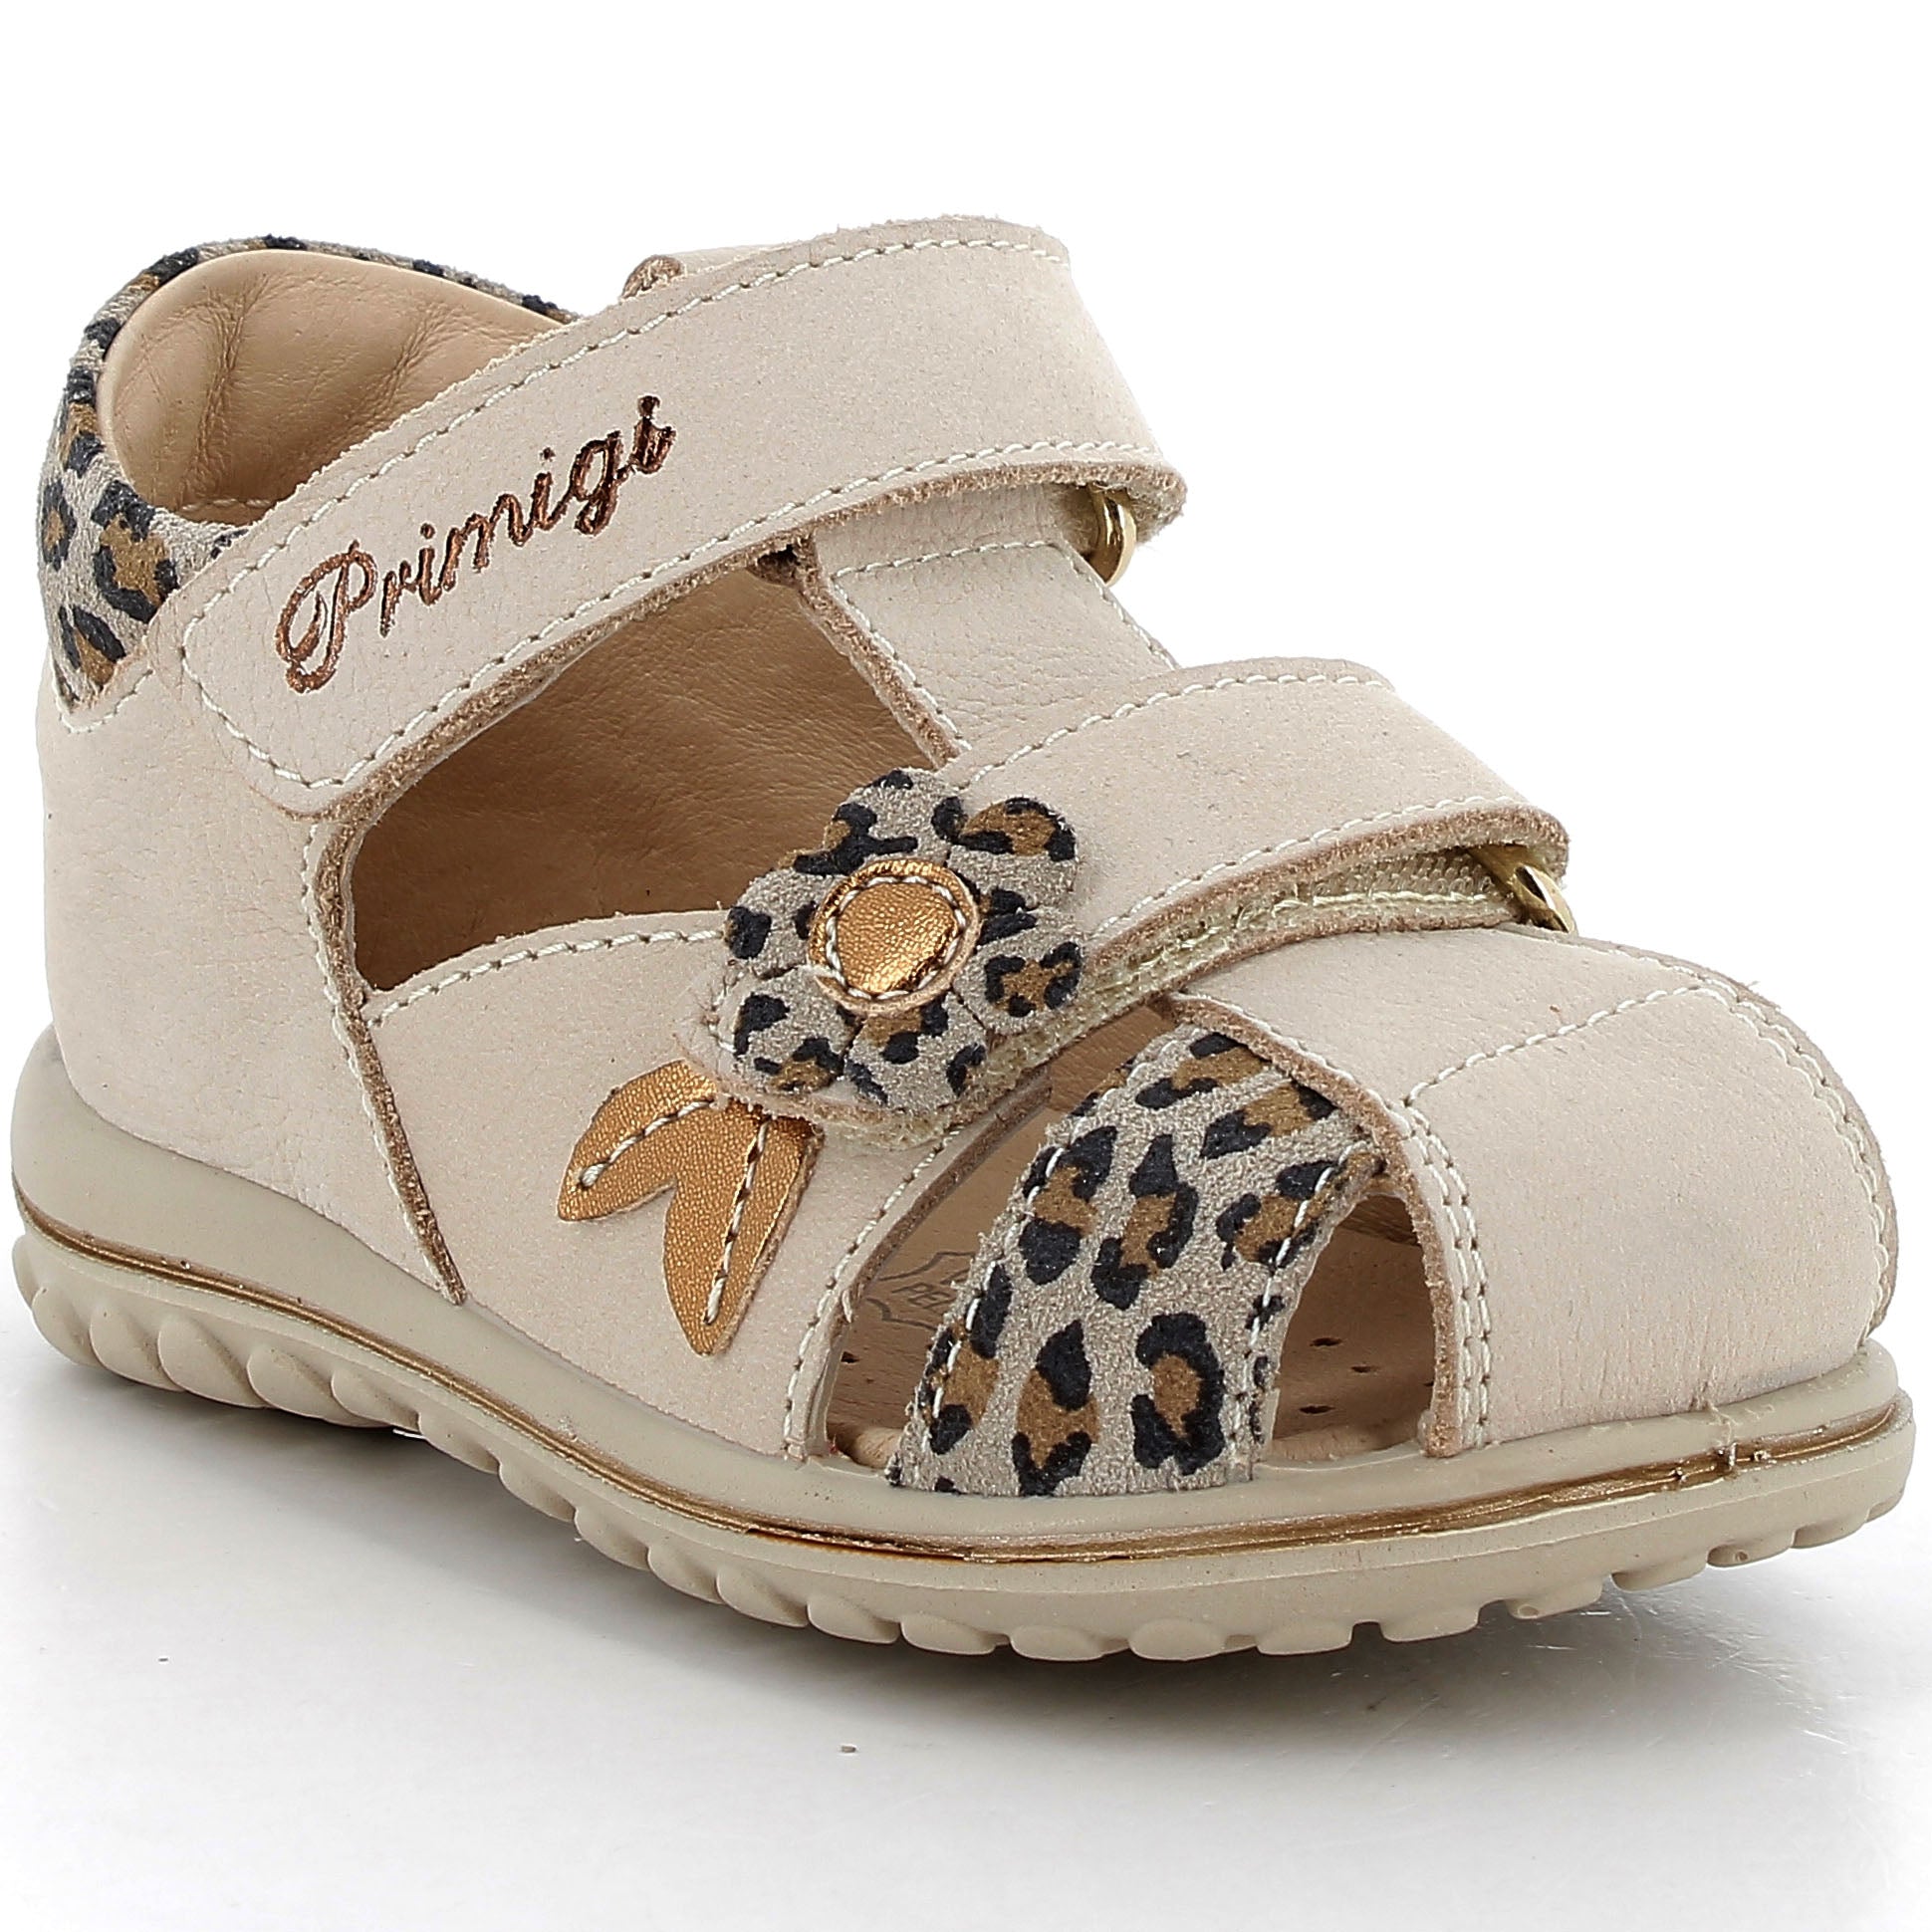  PRIMIGI Halbsandale BABY SWEET 58626-33 - beige / gold - side view showing stylish design and sturdy construction 